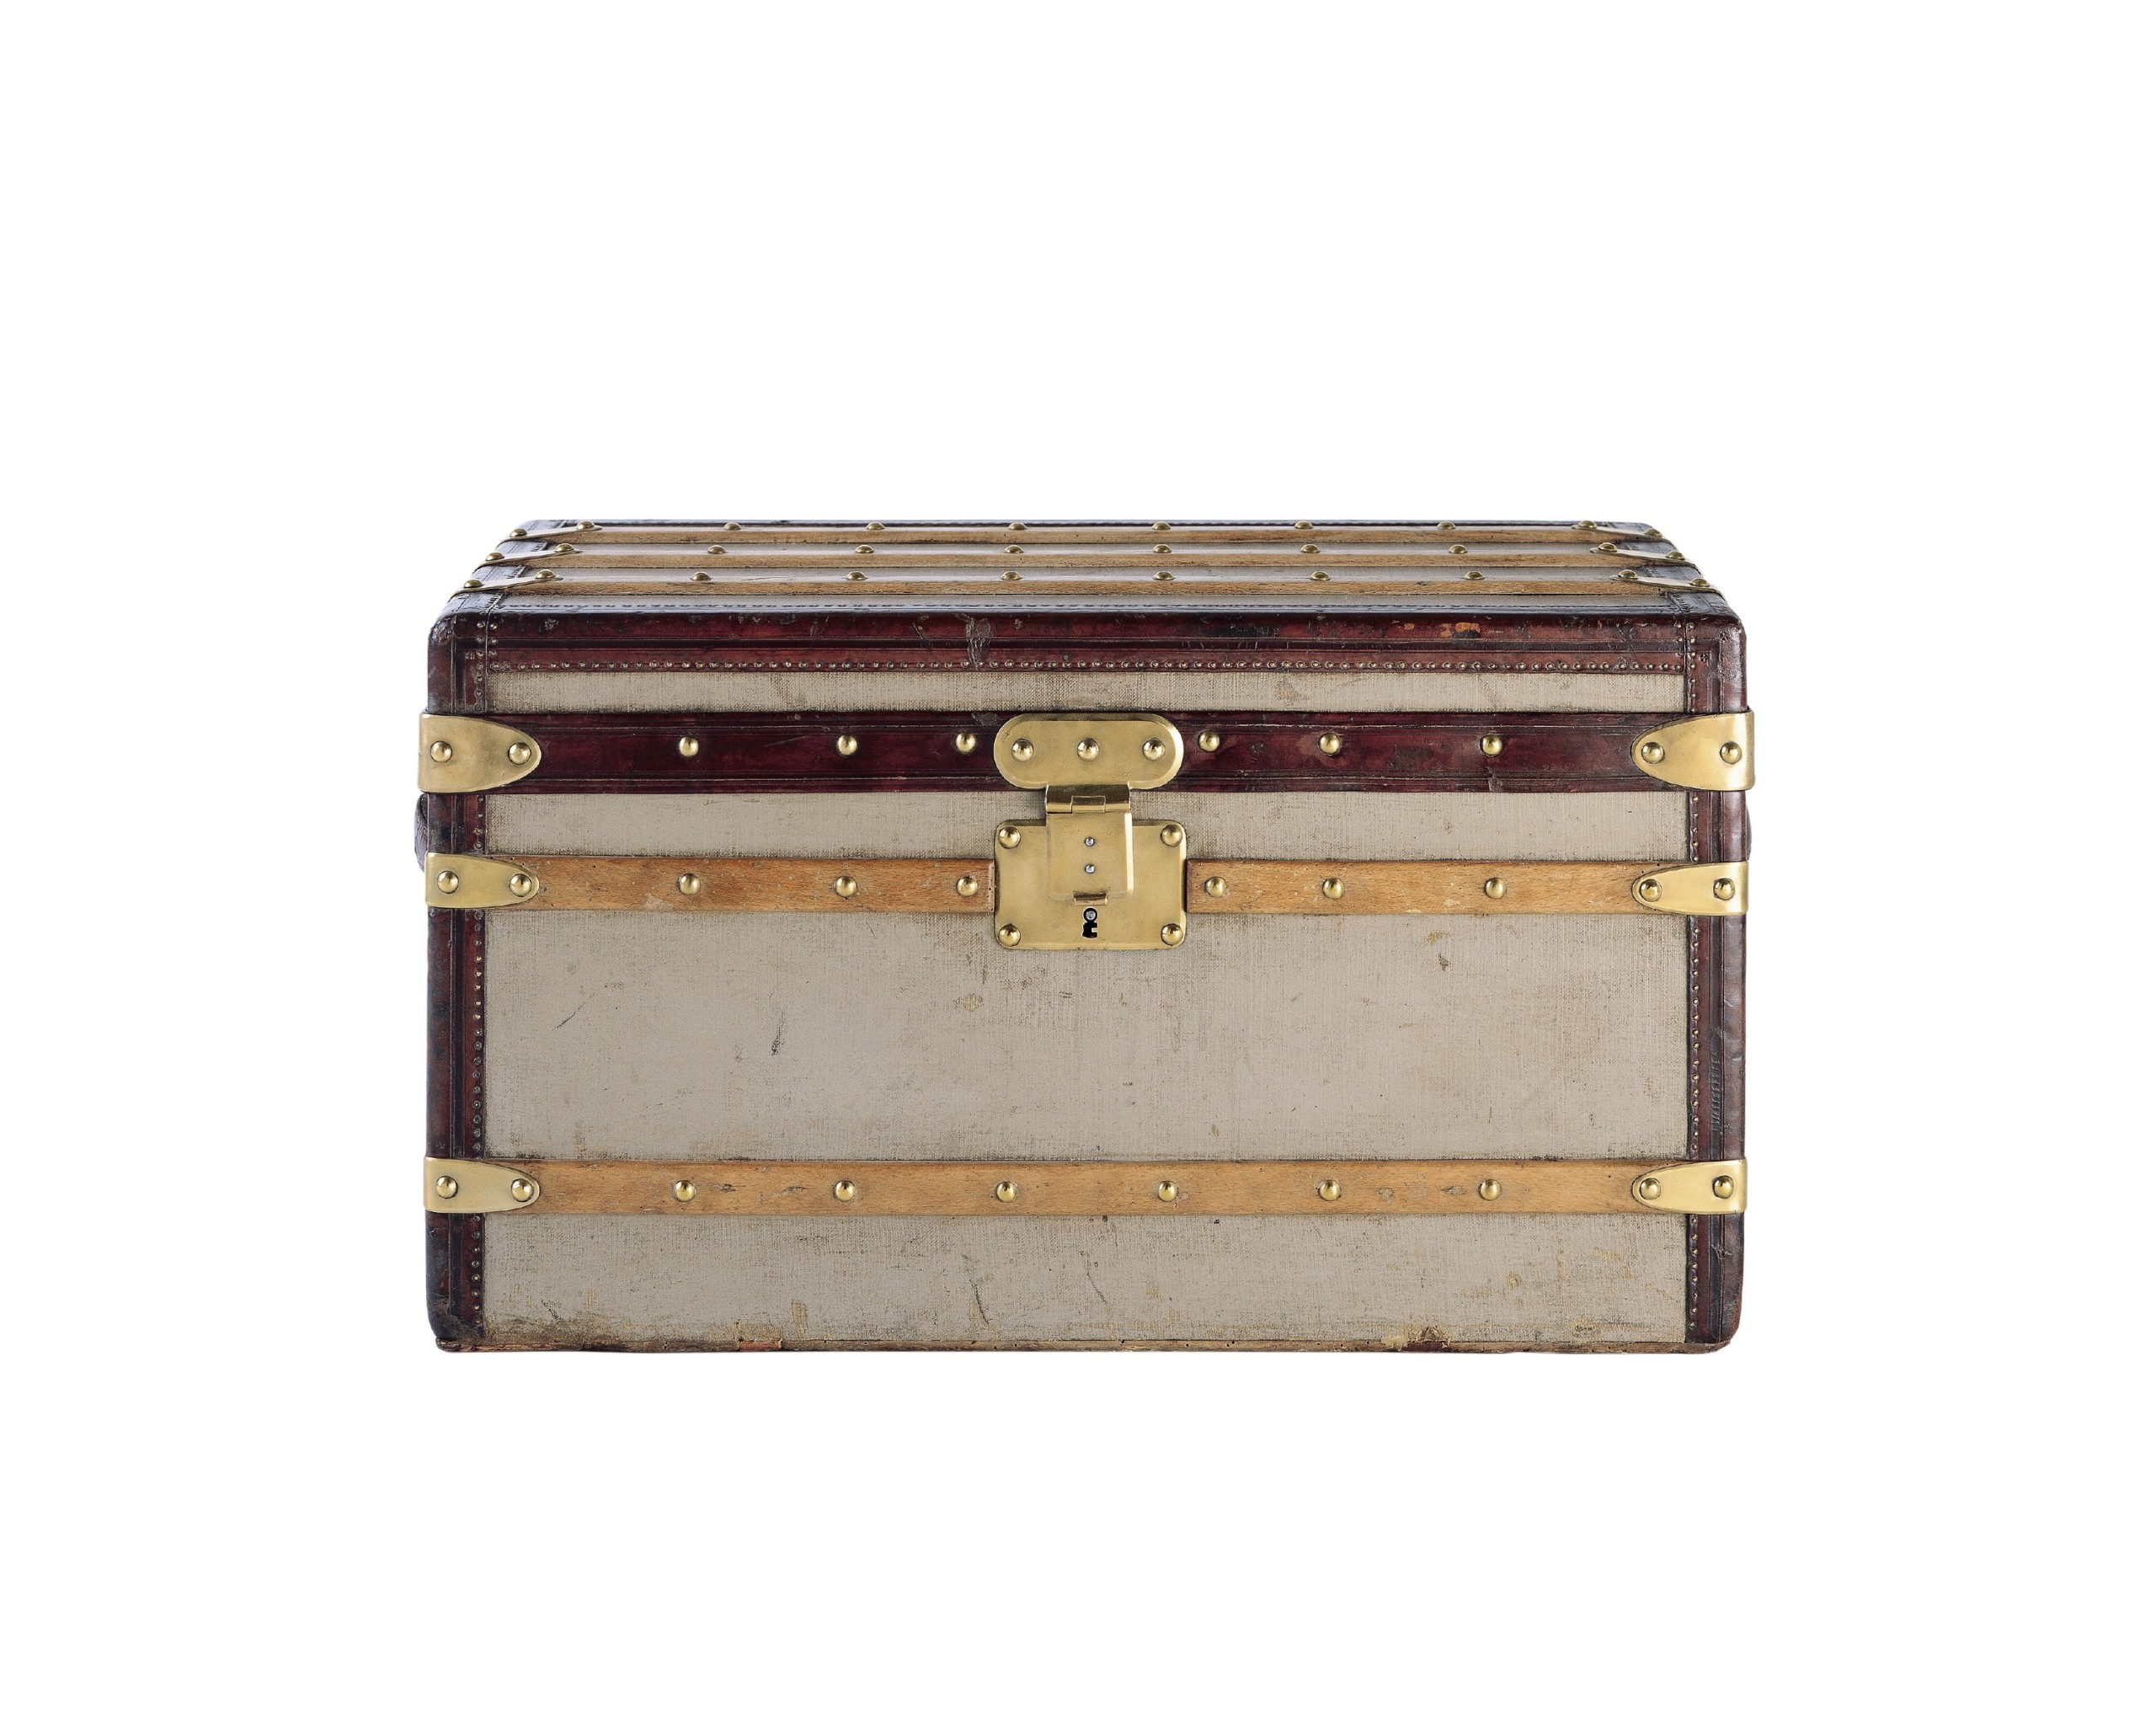 The top 10 most unique and iconic Louis Vuitton trunks throughout history